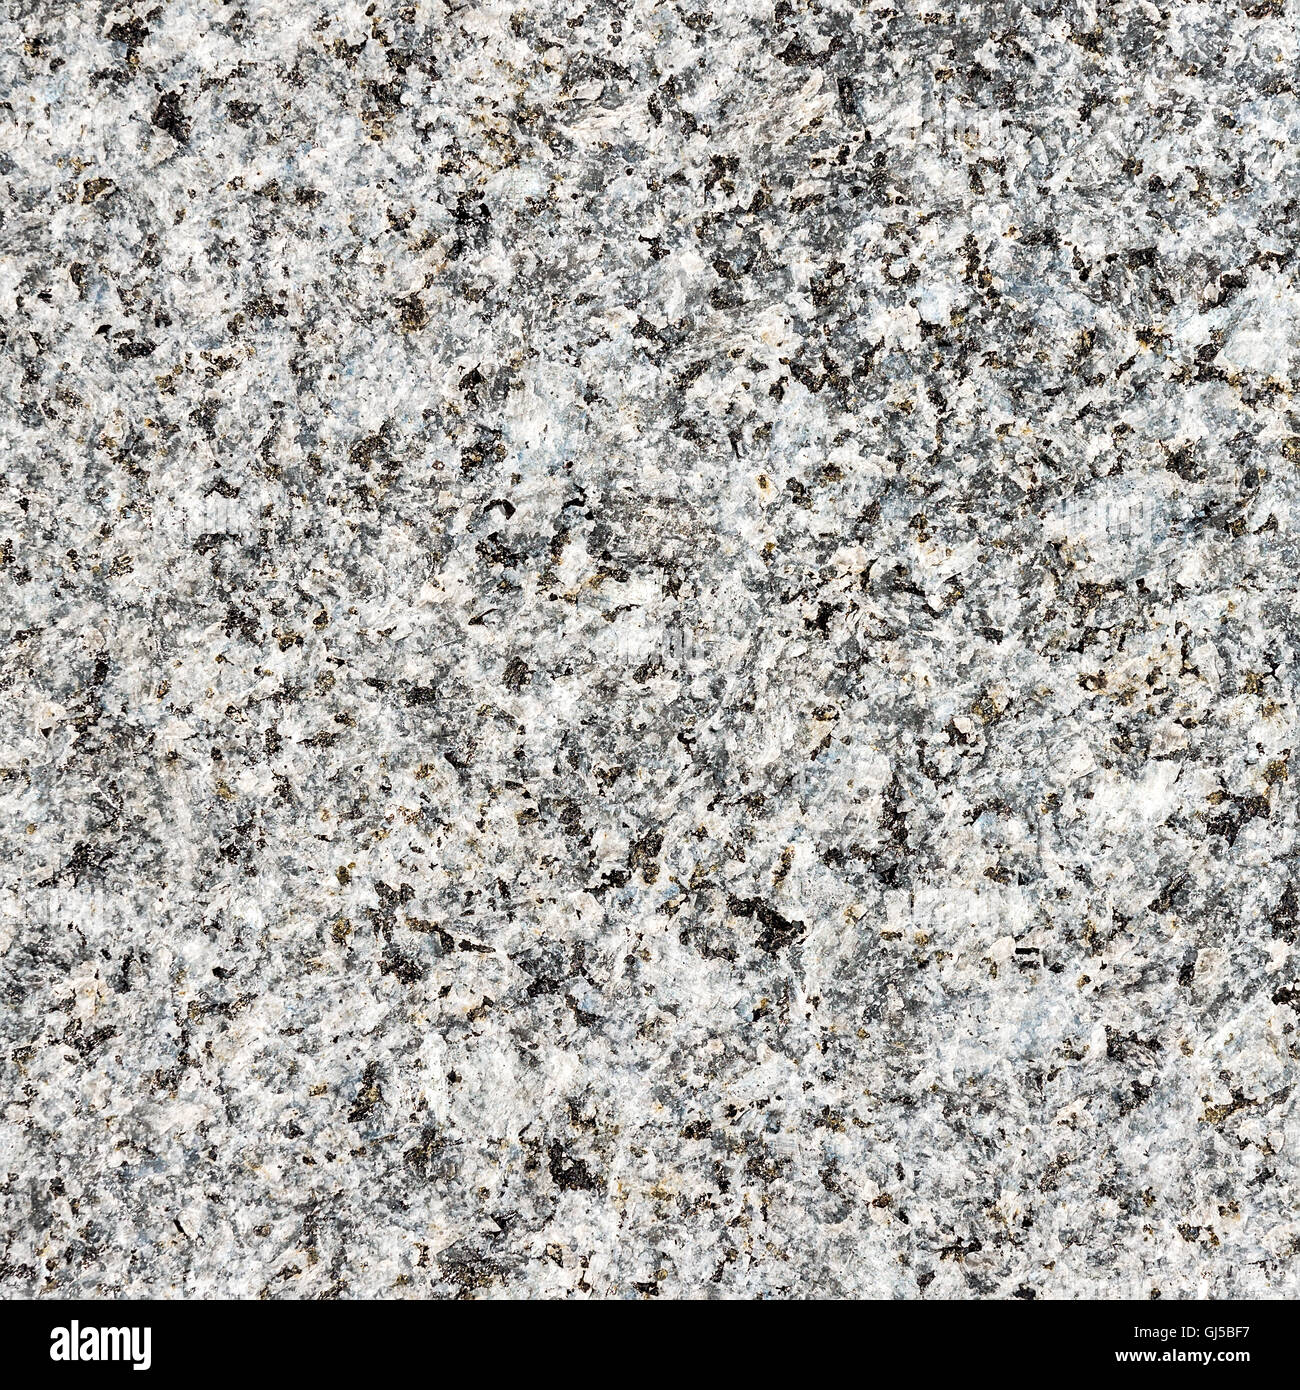 highly detailed texture of granite stone slab surface Stock Photo